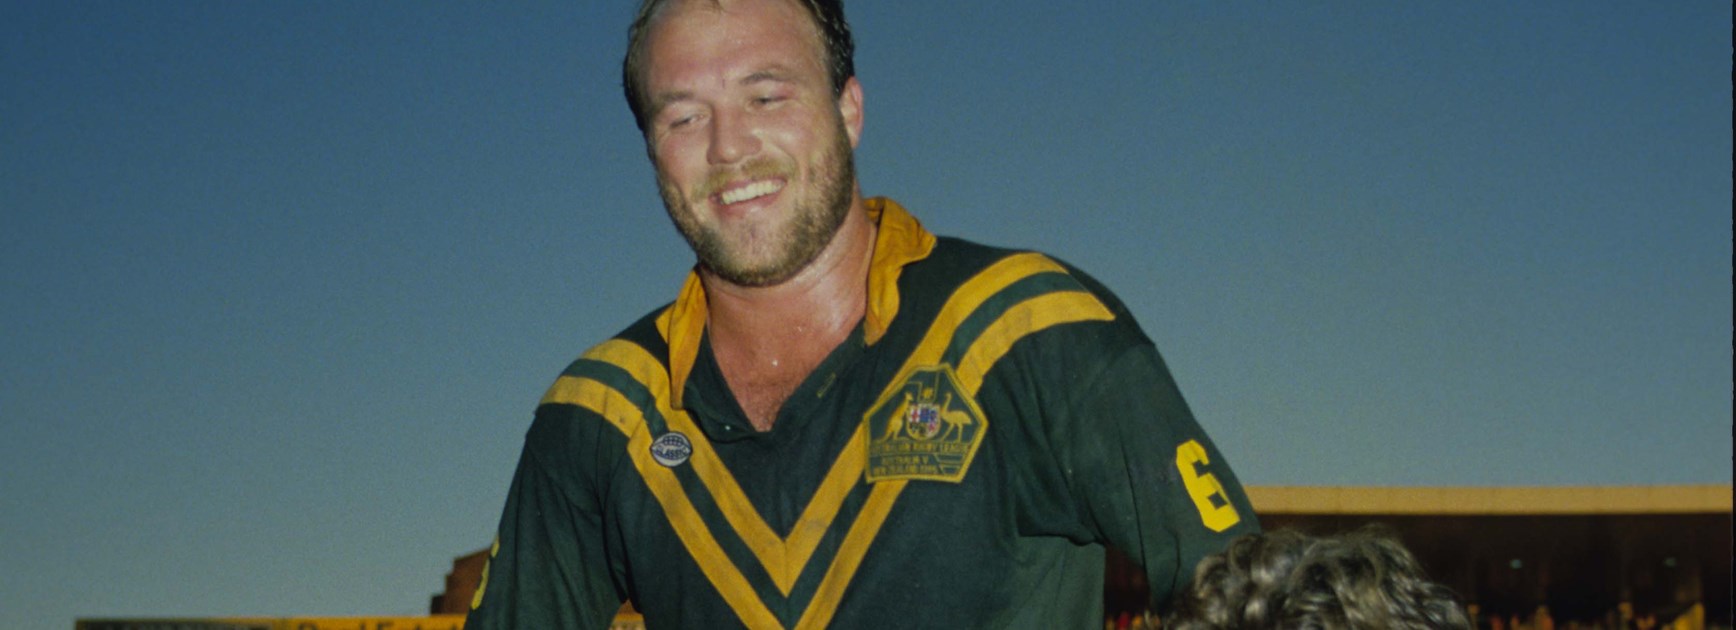 'The King' Wally Lewis